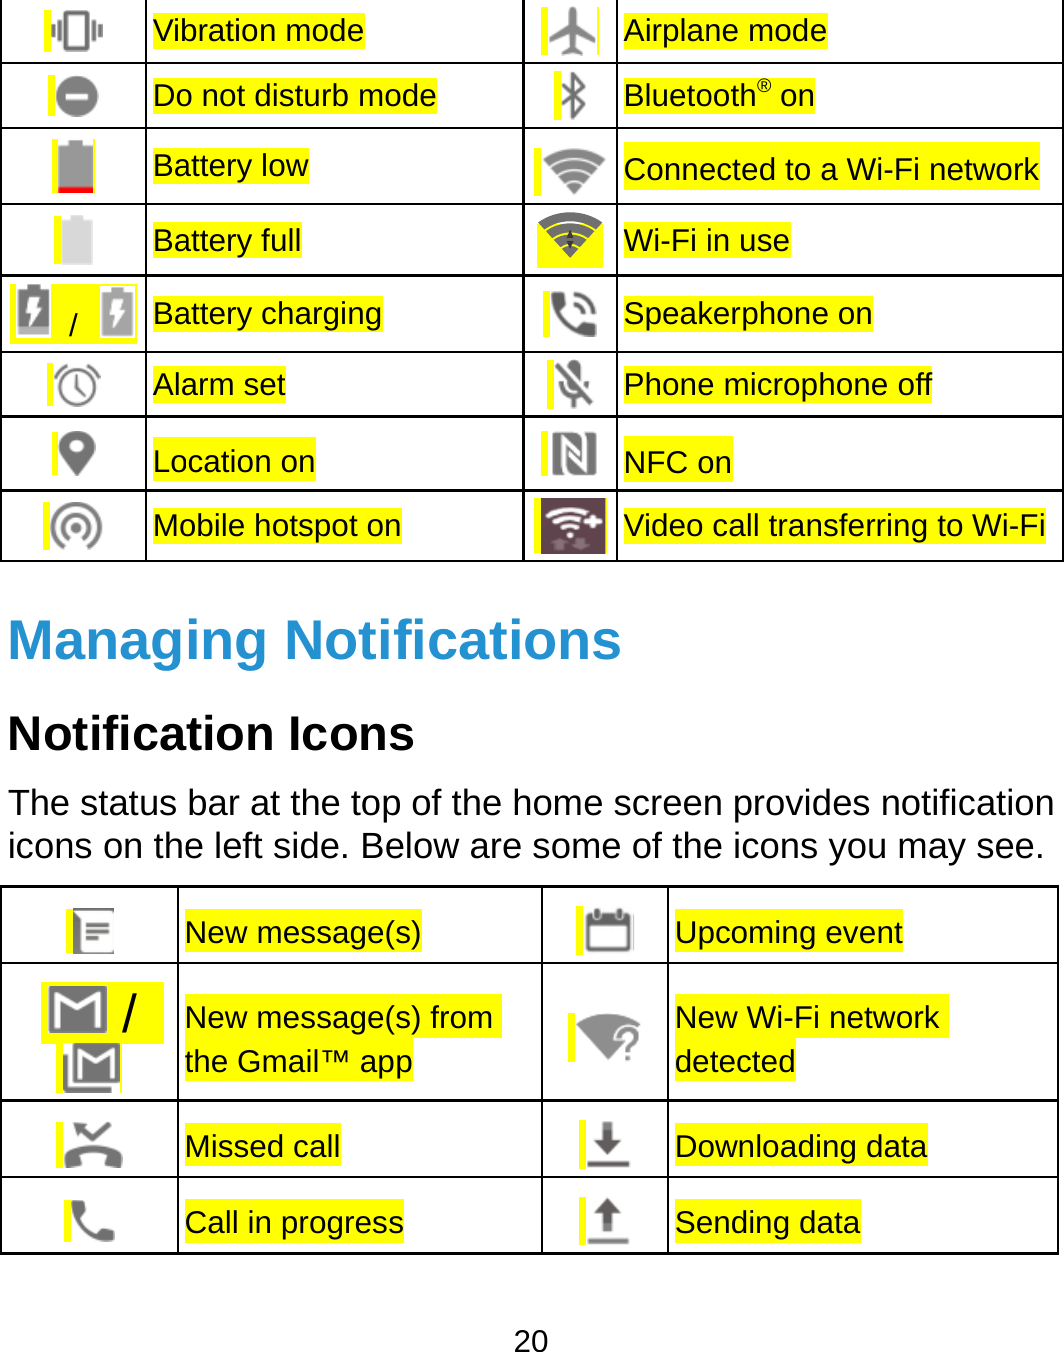   VibDo Ba Ba /   Ba Ala Lo MoManagNotificaThe status icons on the  /  t  bration mode o not disturb modeattery low attery full attery charging arm set cation on obile hotspot on ing Notifiction Icons bar at the top of e left side. BelowNew message(s) New message(s) frthe Gmail™ app Missed call Call in progress 20 AirplanBluetoConneWi-Fi iSpeakPhoneNFC oVideo cations the home screenw are some of theUprom  NedeDoSene mode ooth® on ected to a Wi-Fi netin use kerphone on e microphone off on call transferring ton provides notifice icons you may pcoming event ew Wi-Fi network tected ownloading data ending data tworkWi-Fication see.  